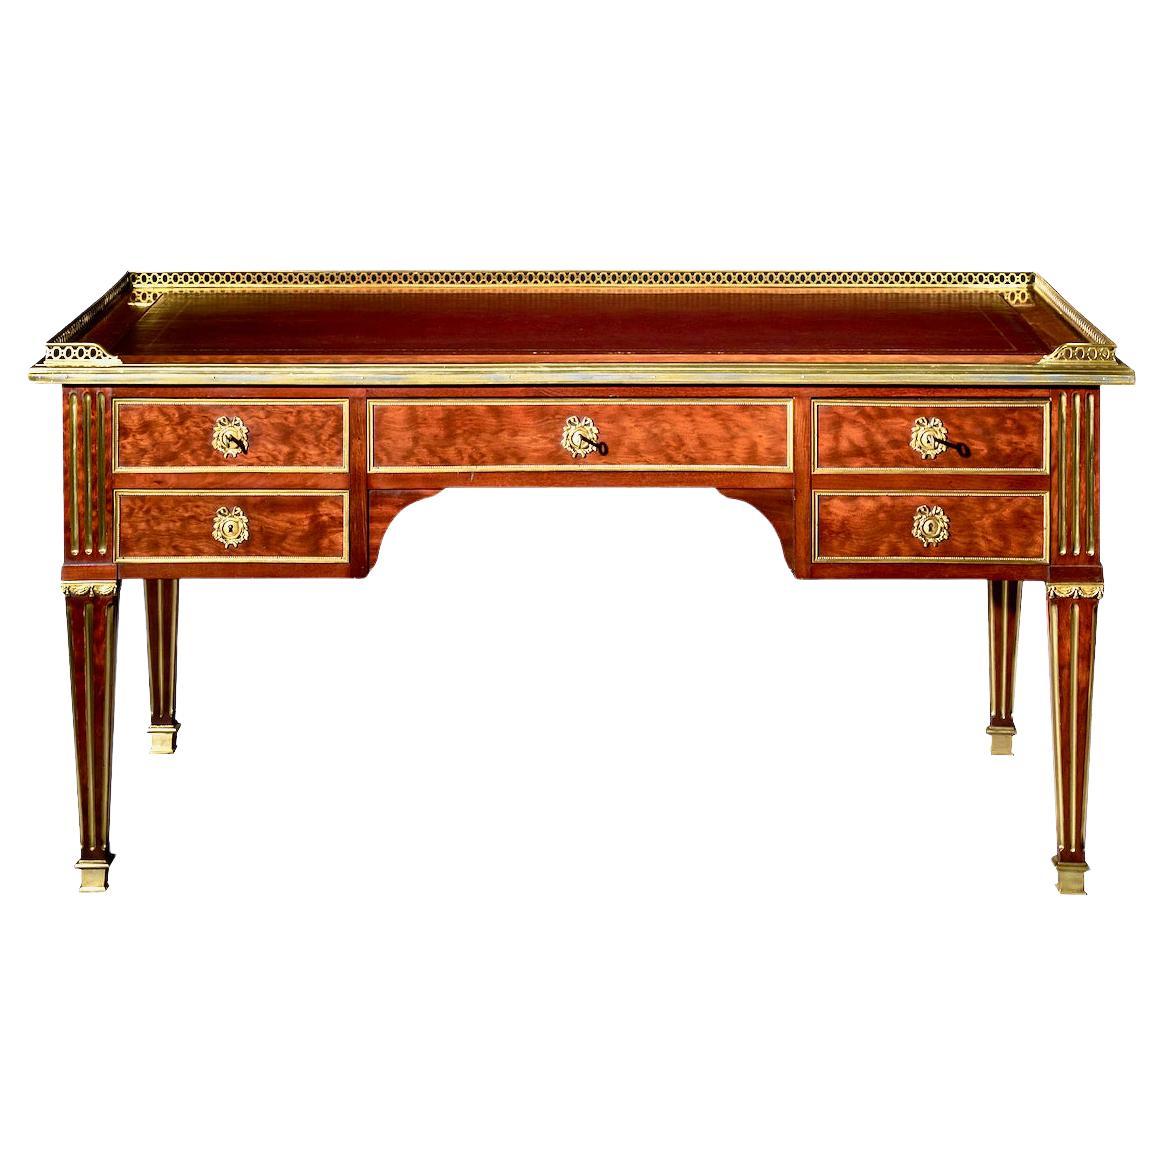 Large 19th Century Desk in French Louis XVI Style